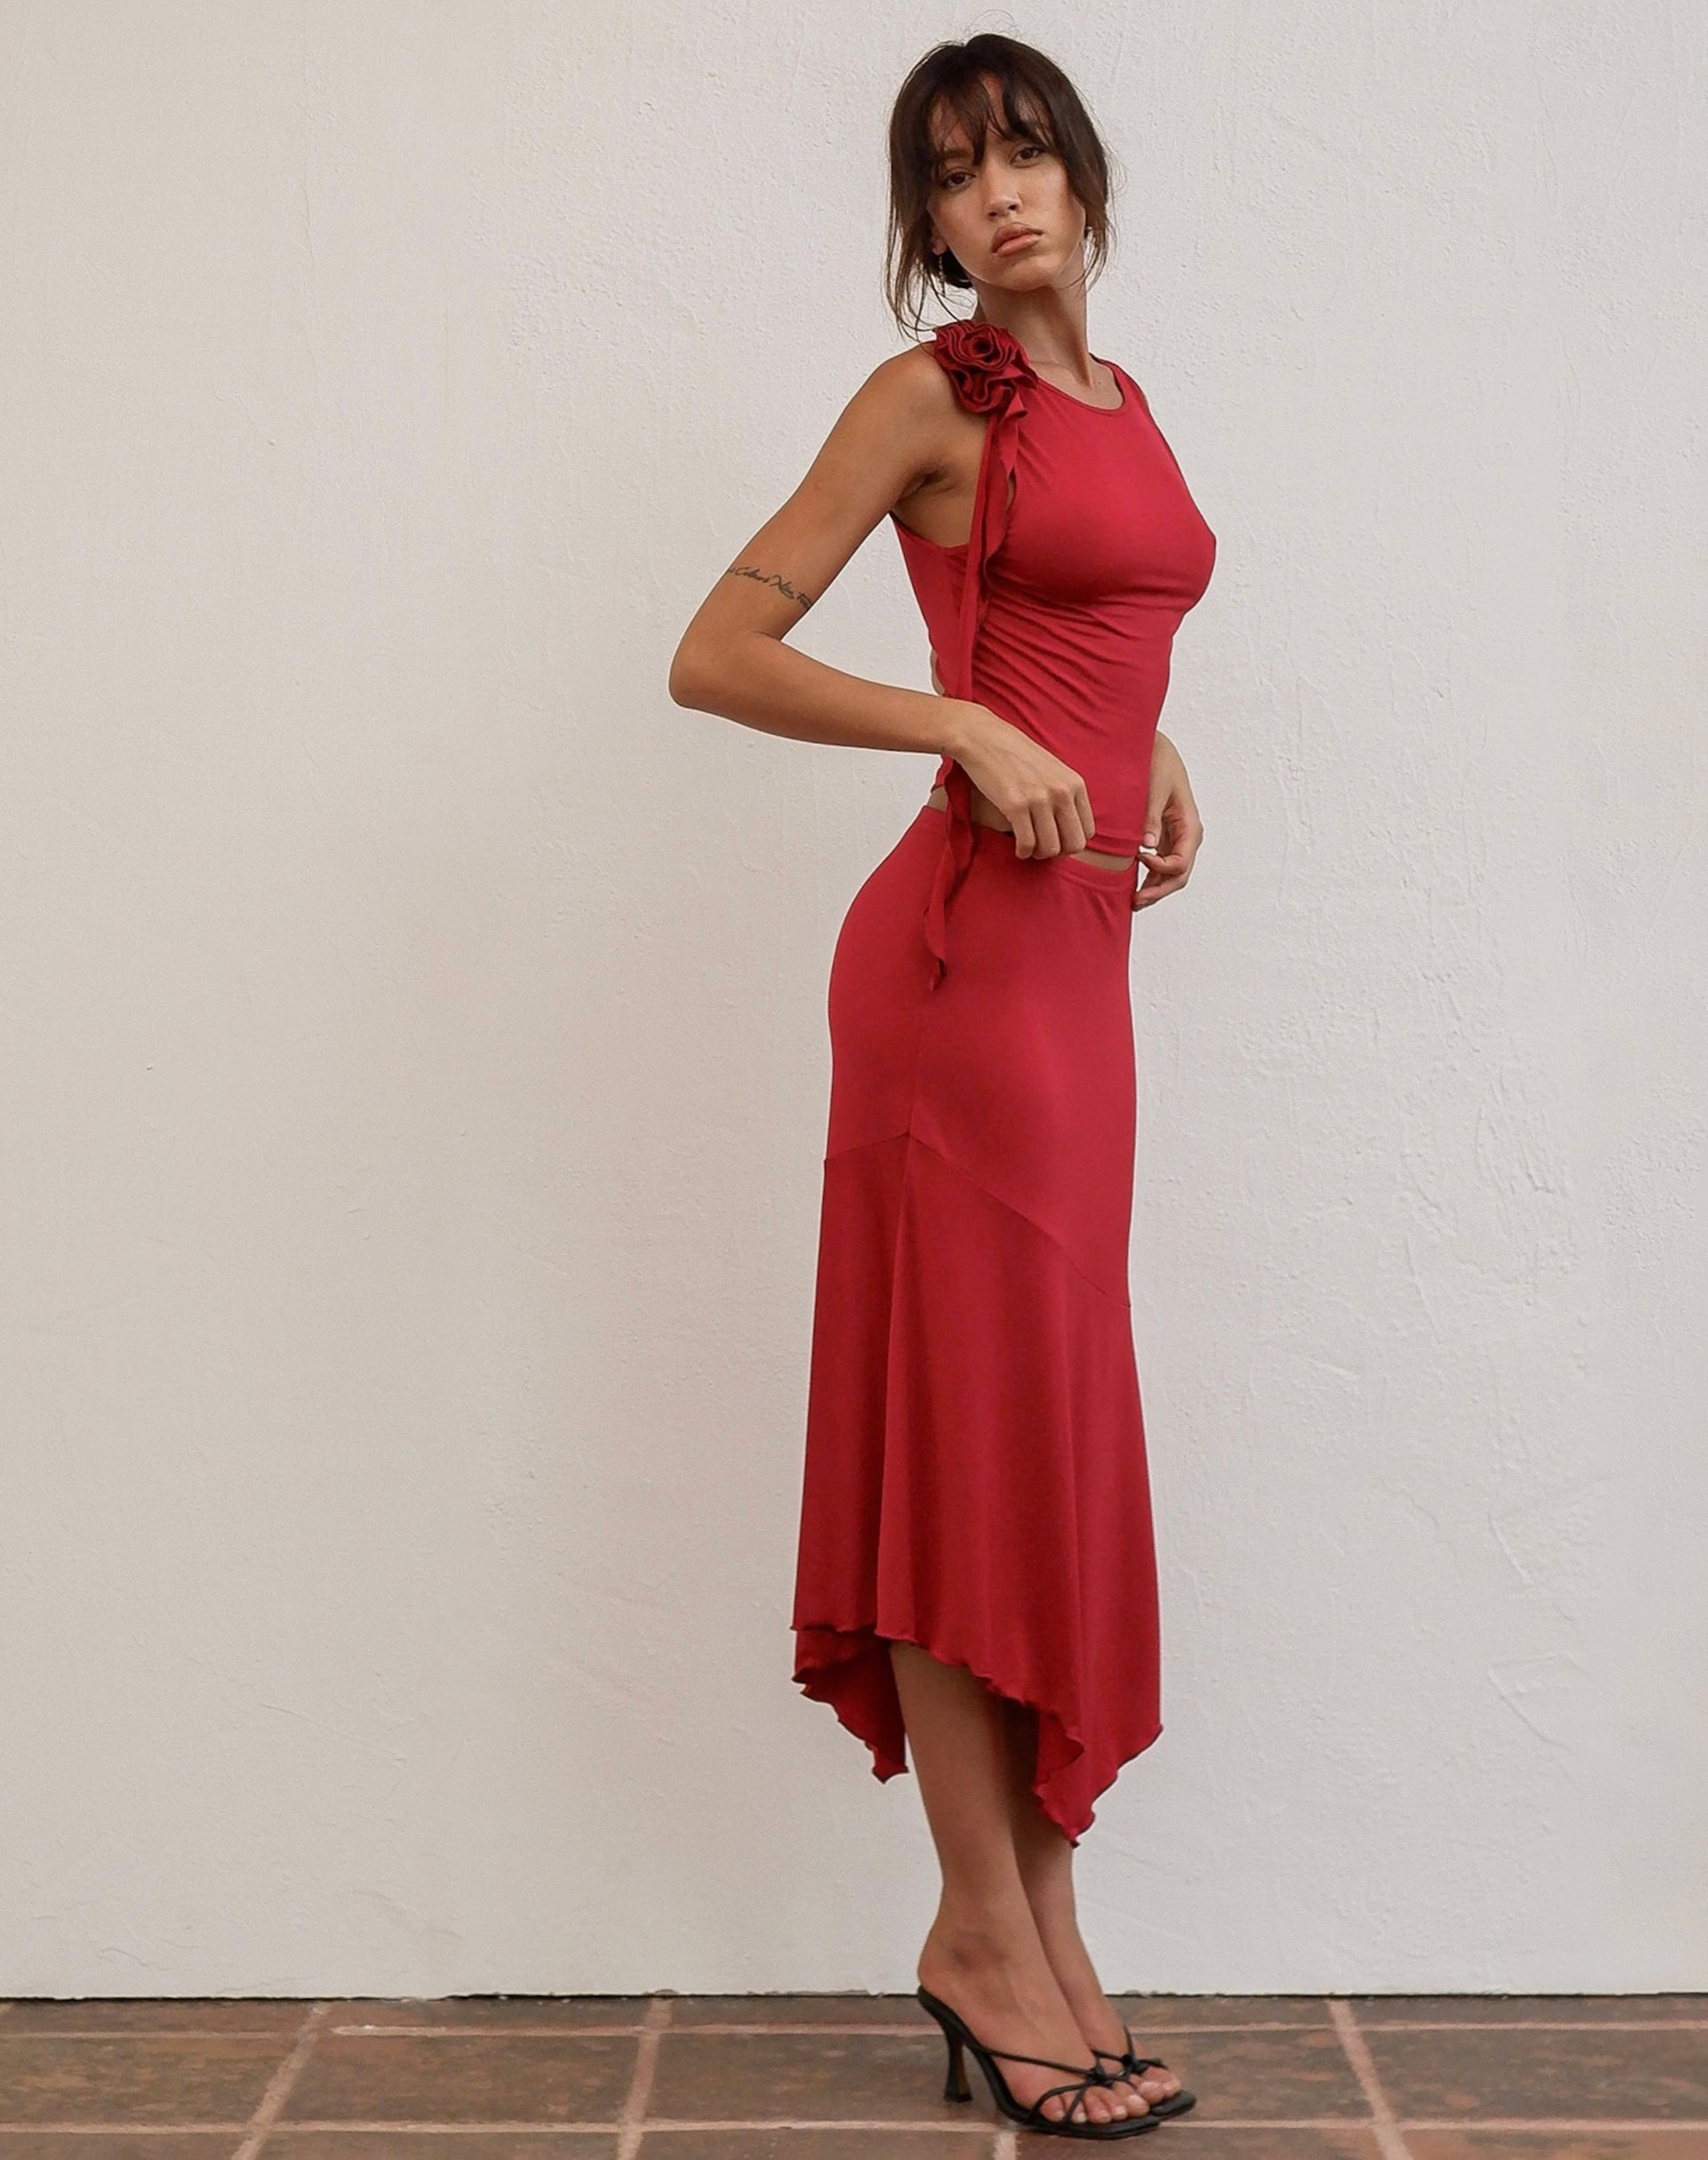 Image of Cinta Low Rise Midi Skirt in Red